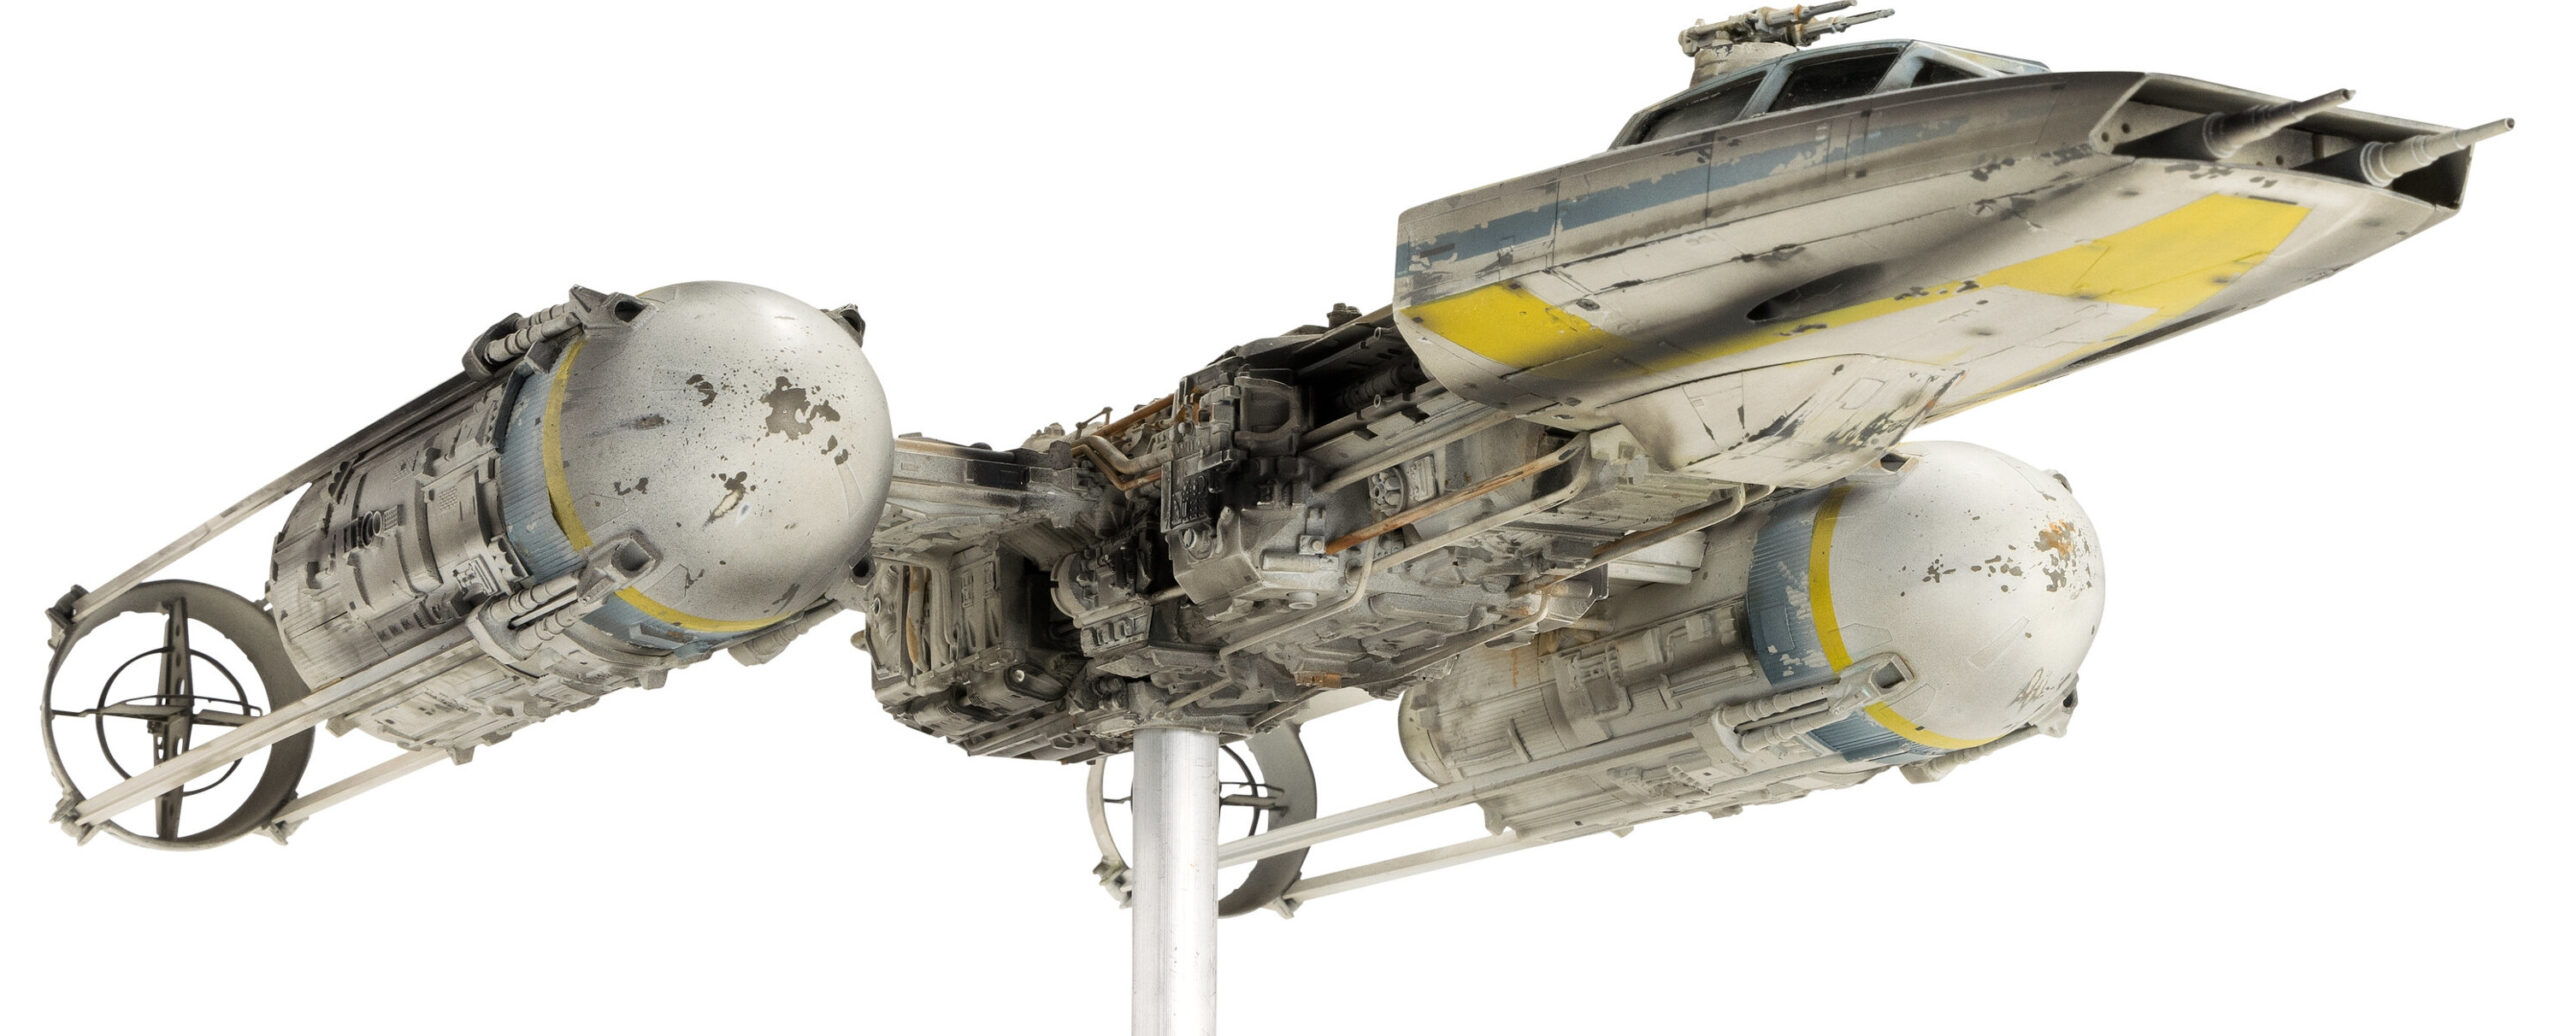 Y-Wing model from Star Wars Episode IV a New Hope